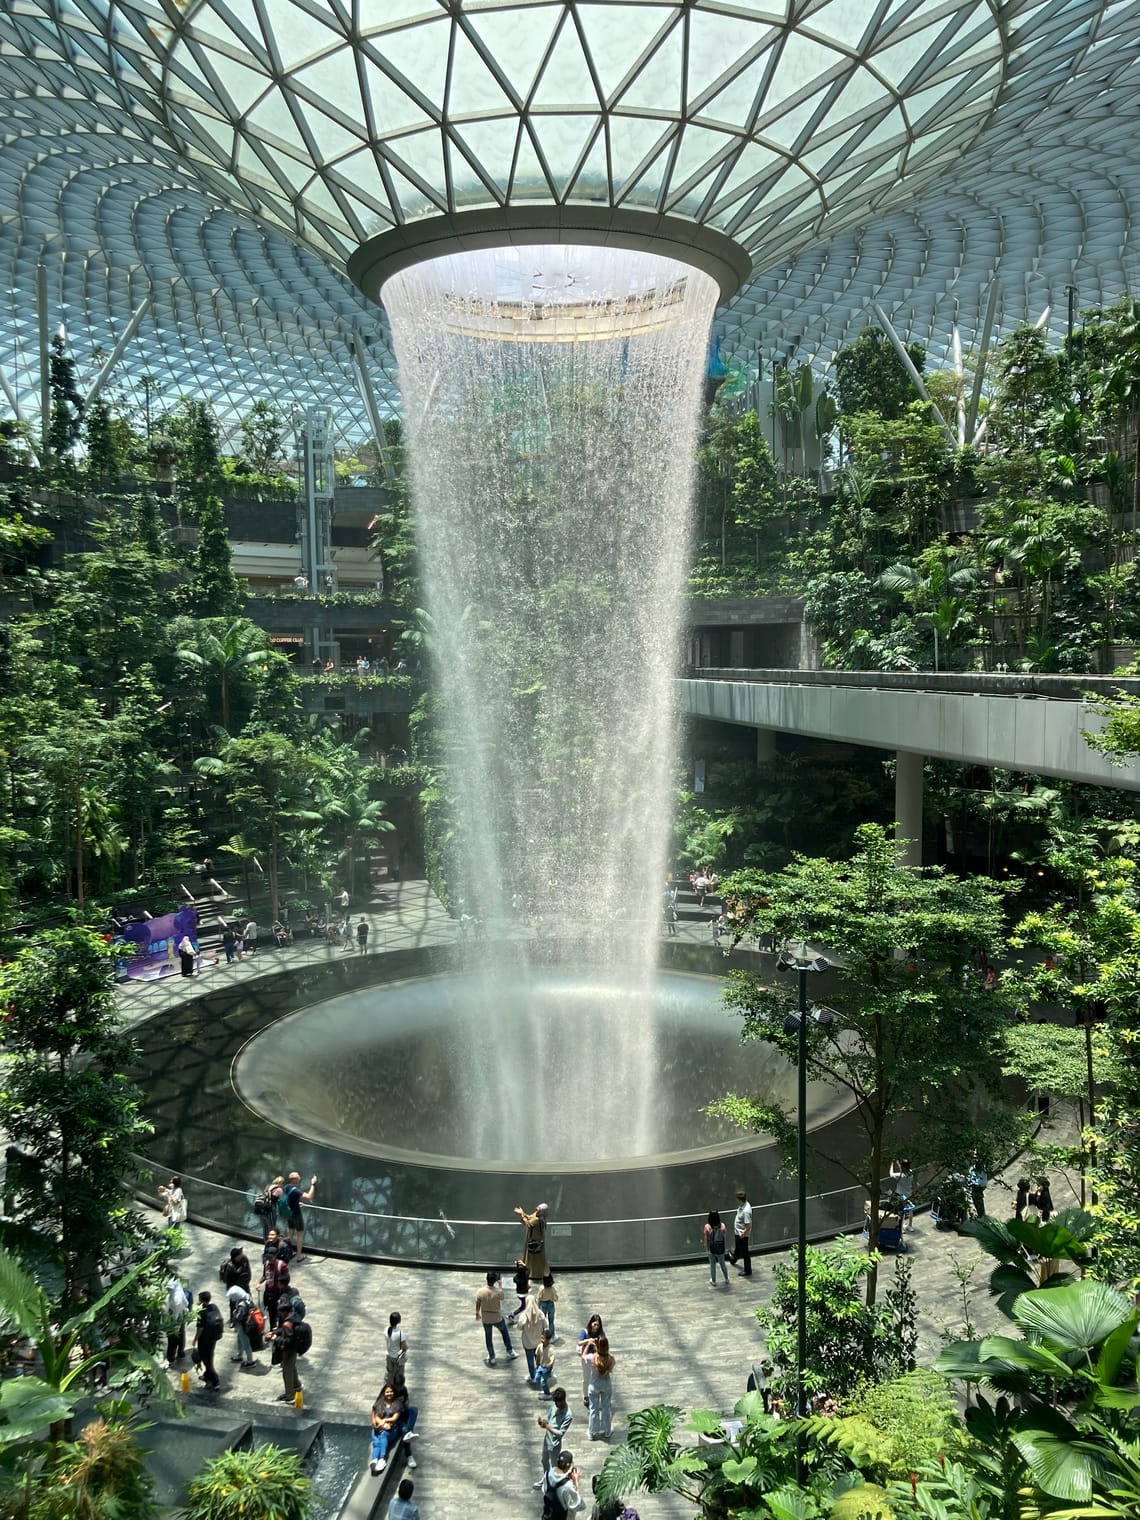 A column of water (surrounded by lush vegetation) drops from a circular opening in a glass roof.  